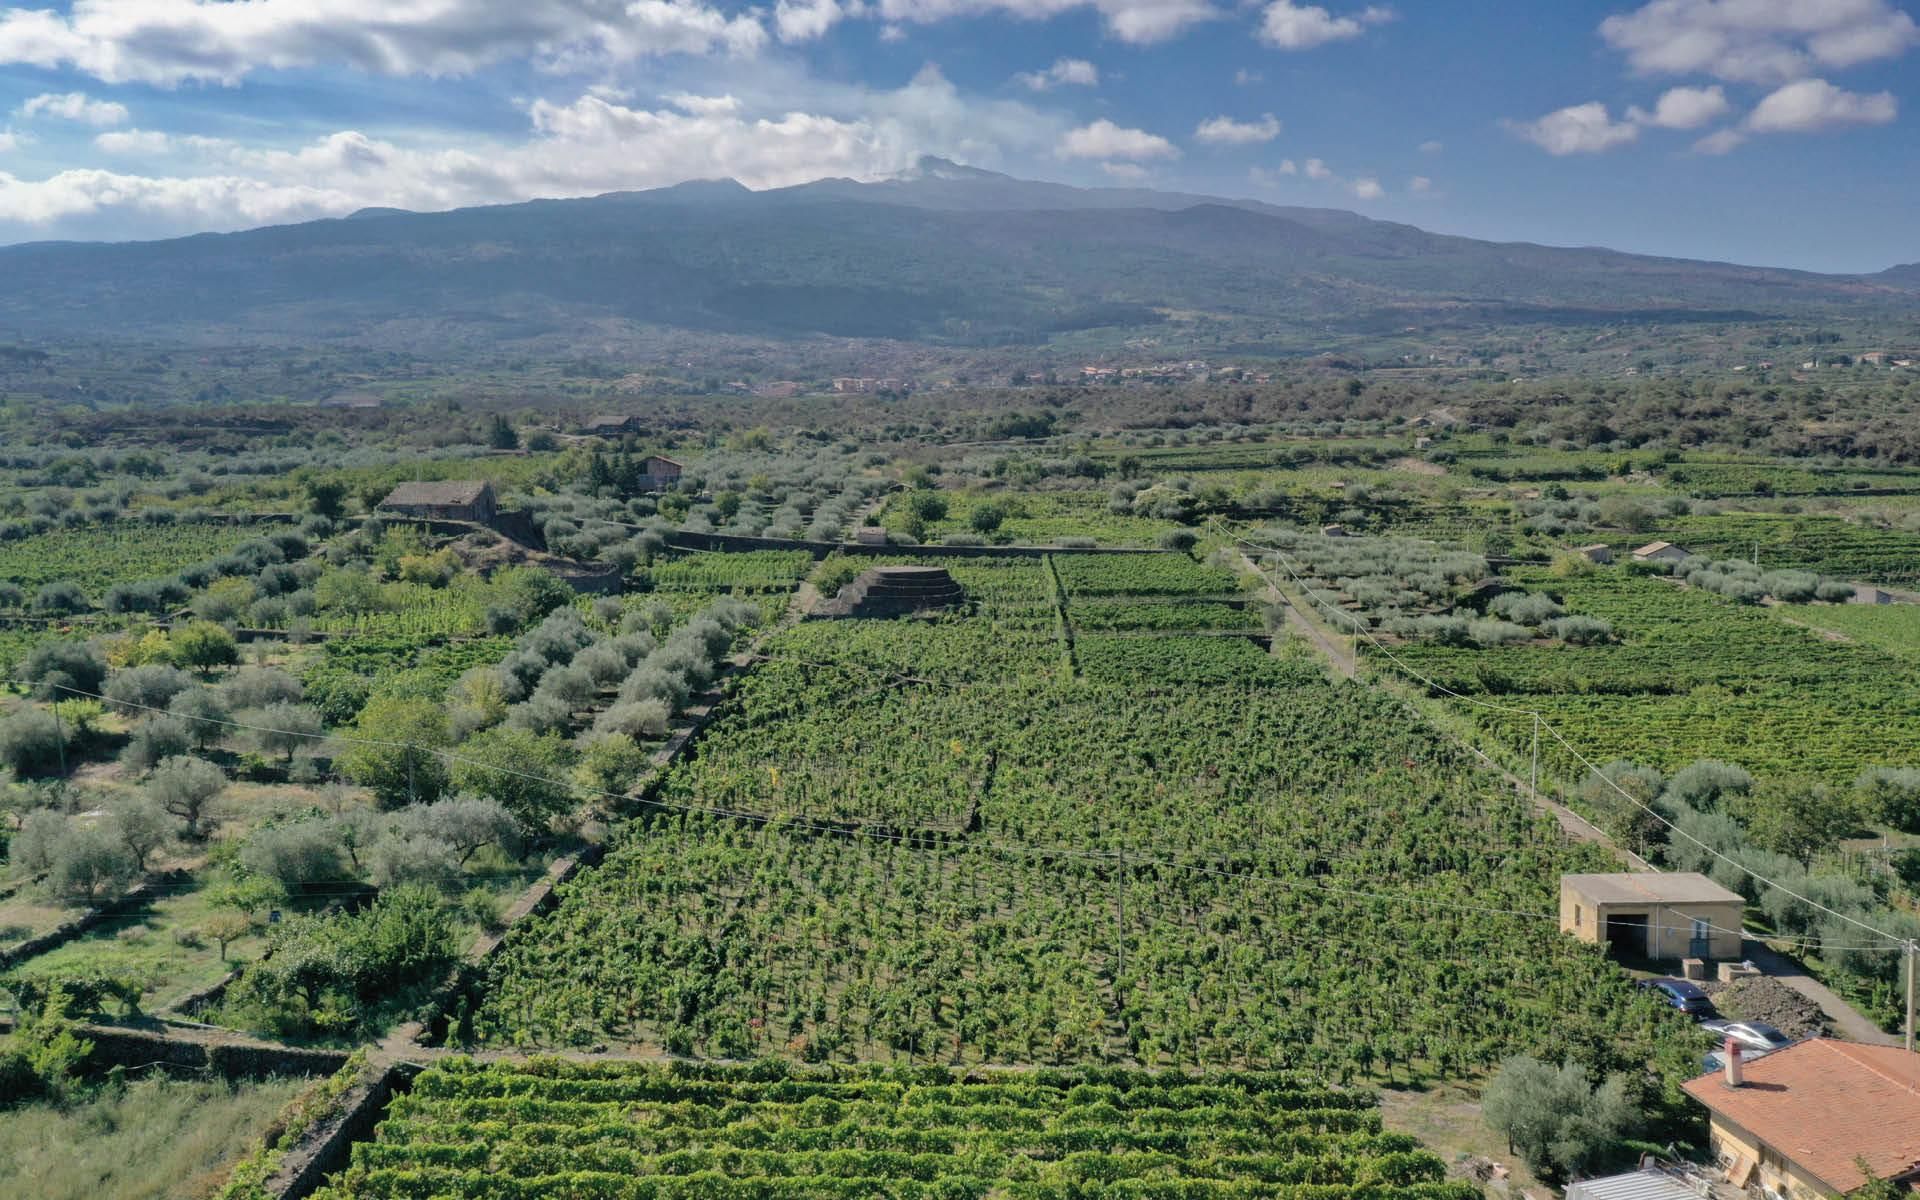 the vineyards of Feudo di Mezzo on the slope of Mount Etna